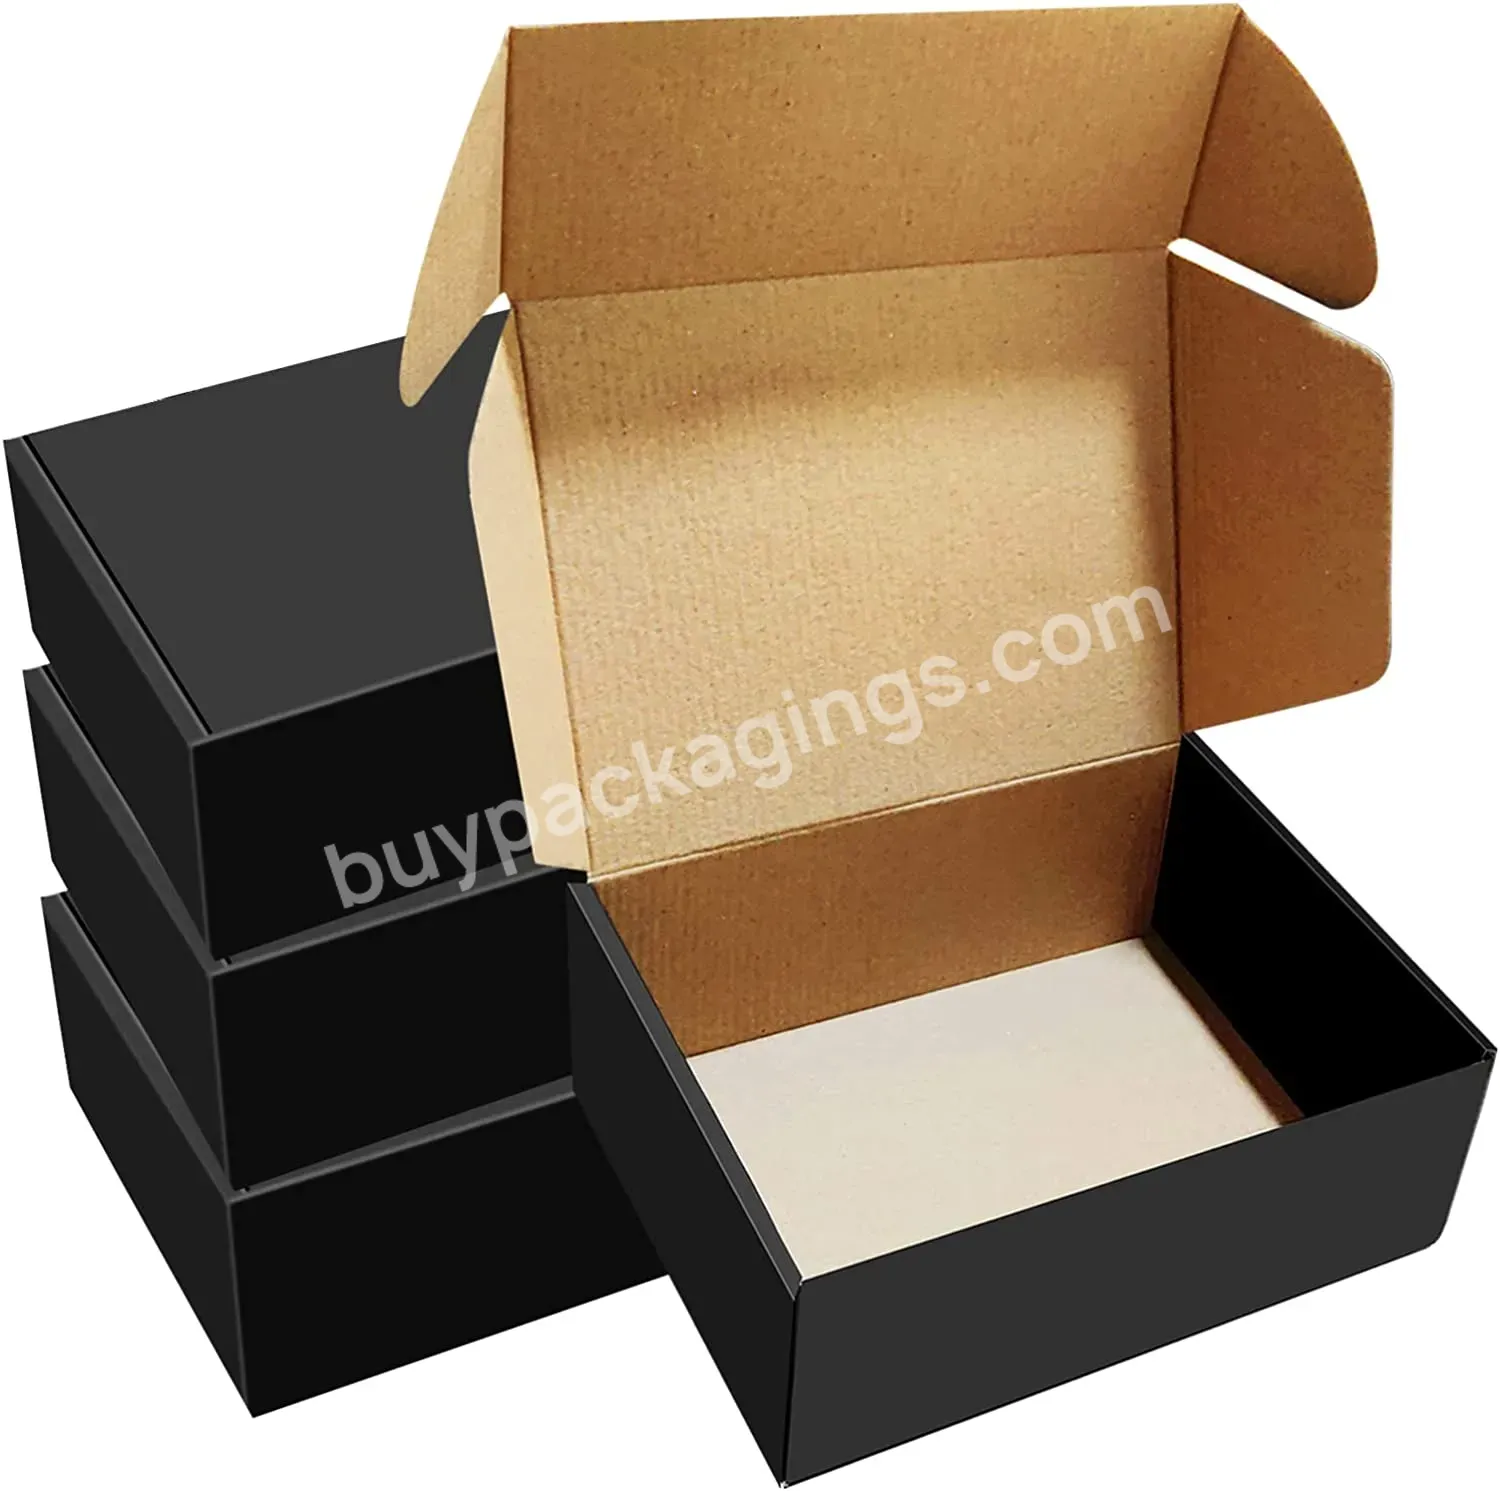 8x6x3 Inch Black Corrugated Mailer Boxes Recyclable Cardboard Box Flat Literature Mailers For Gifts Product - Buy Electronic Packaging Box,Recycled Mailer Box,Boxes For Gift Sets.